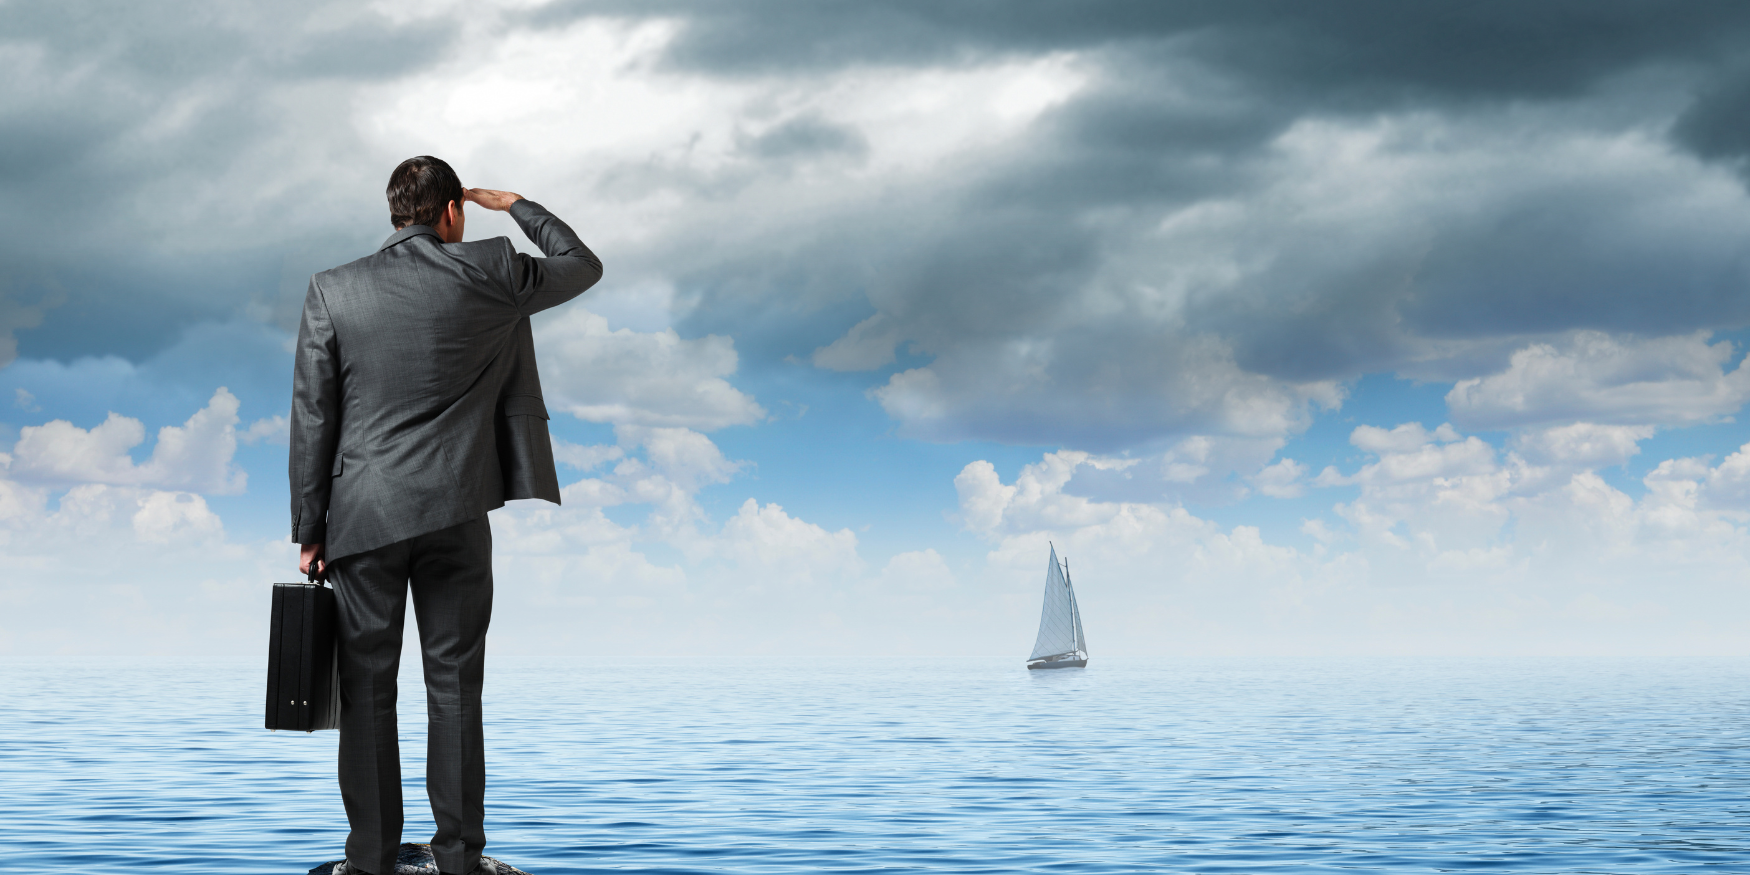 Man in business suit looking out at a boat on the water